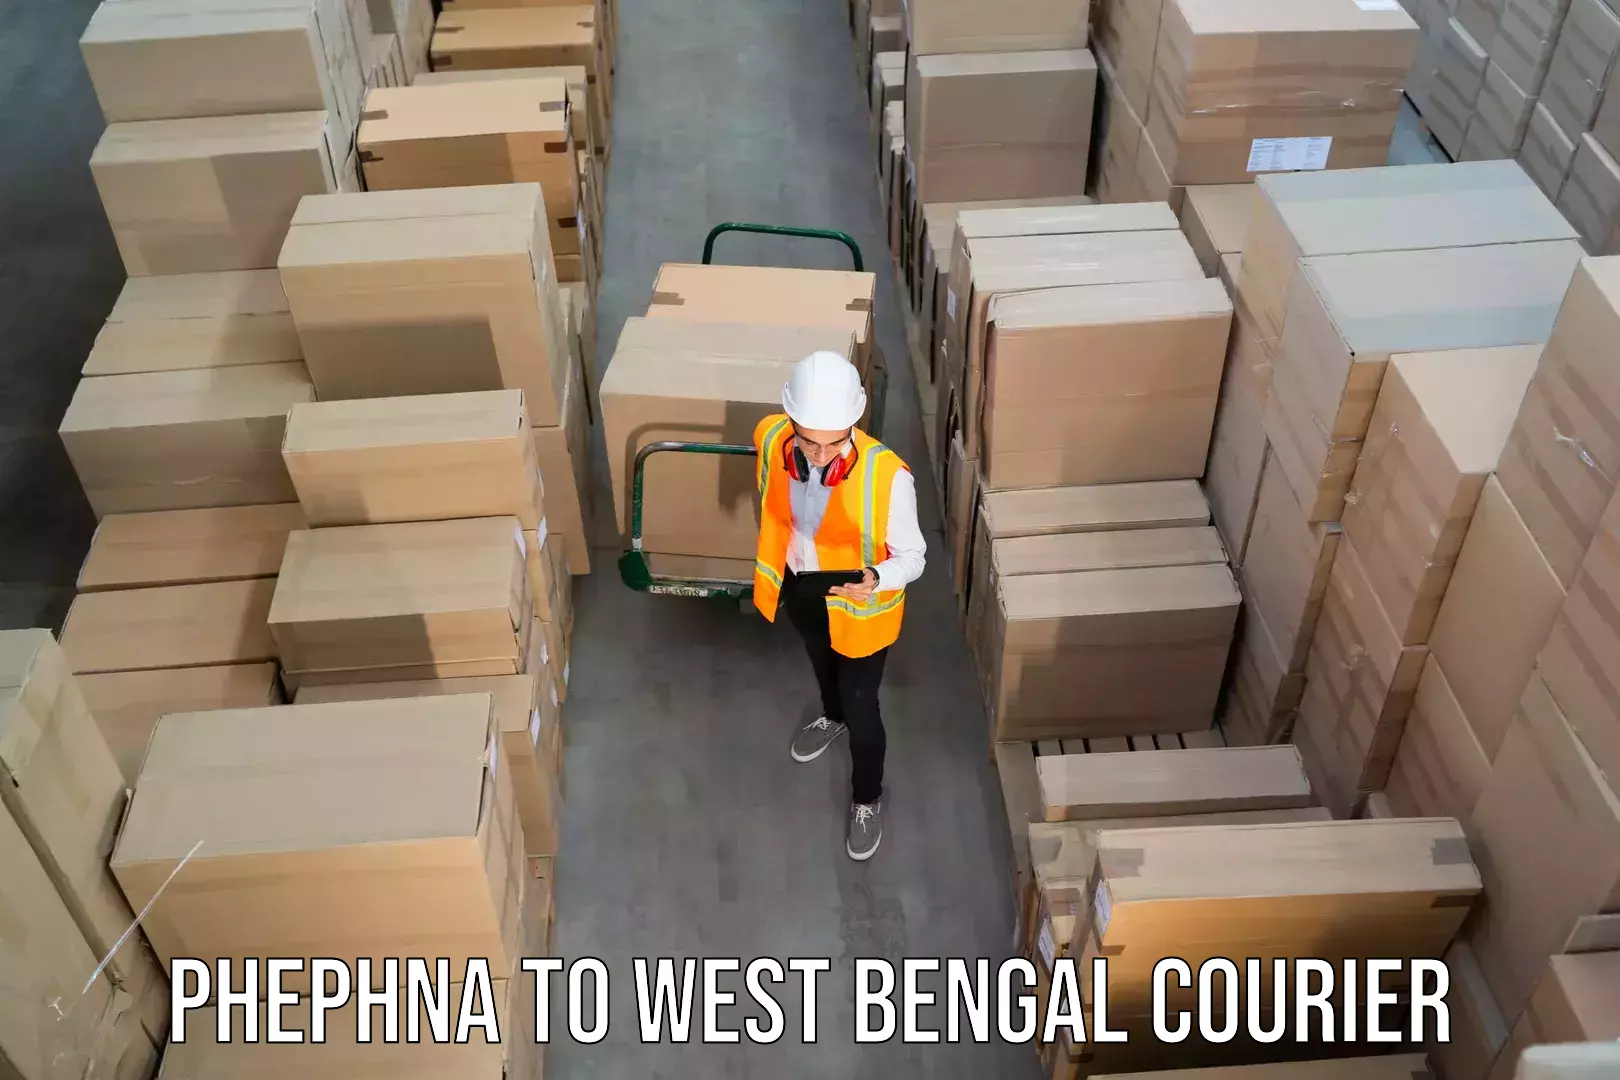 Next-day delivery options Phephna to West Bengal